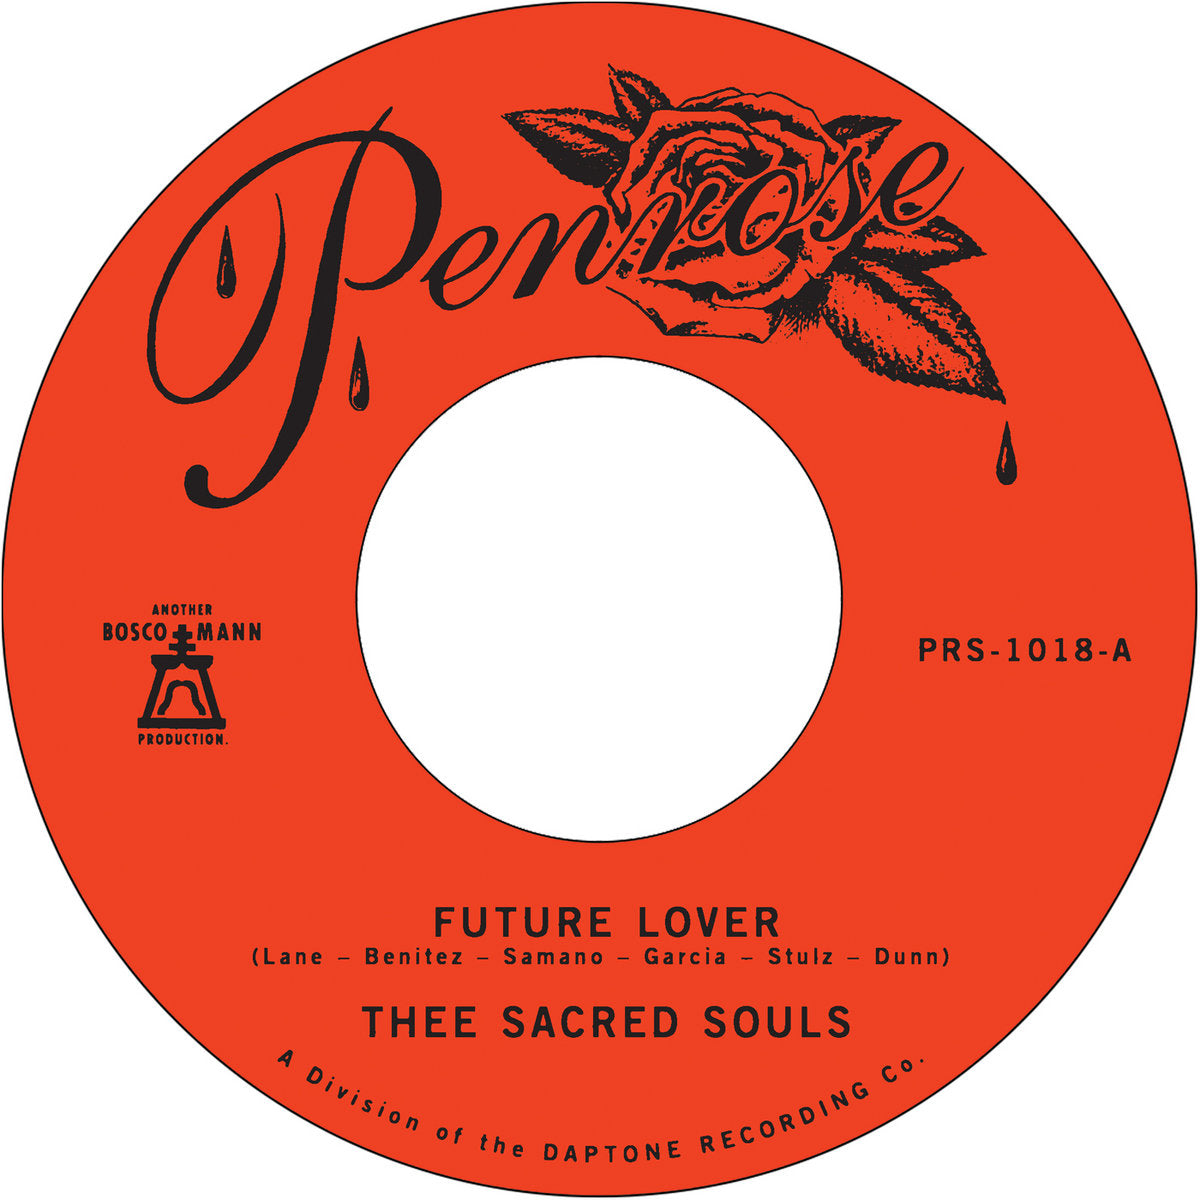 THEE SACRED SOULS - FUTURE LOVER b/w FOR NOW Vinyl 7"